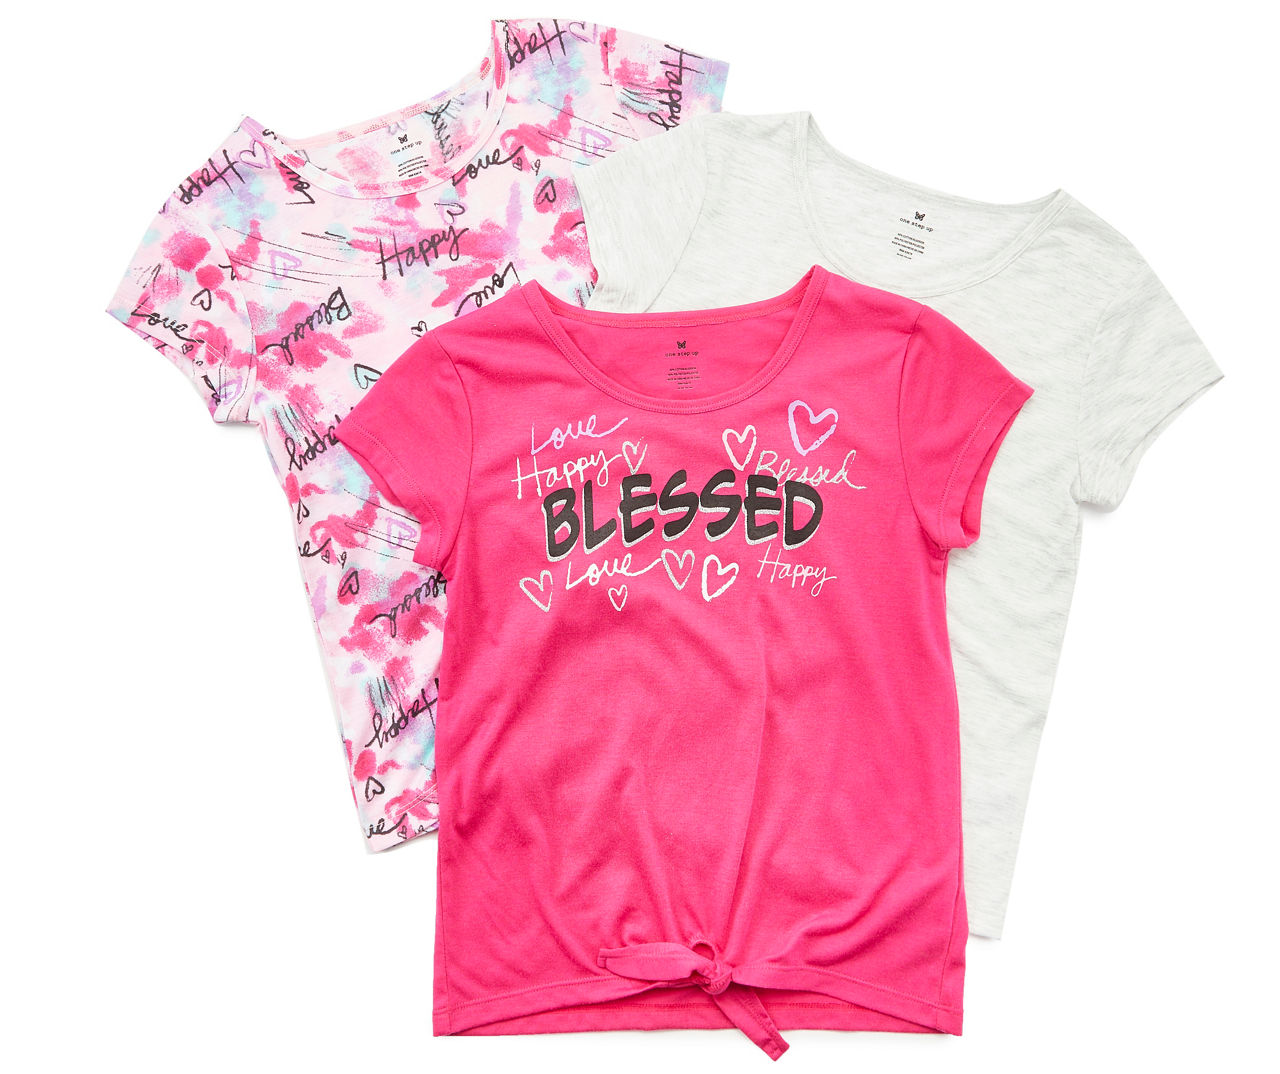 RBX Kids' Size 10/12 Pink, White & Patterned 3-Piece Tee Set